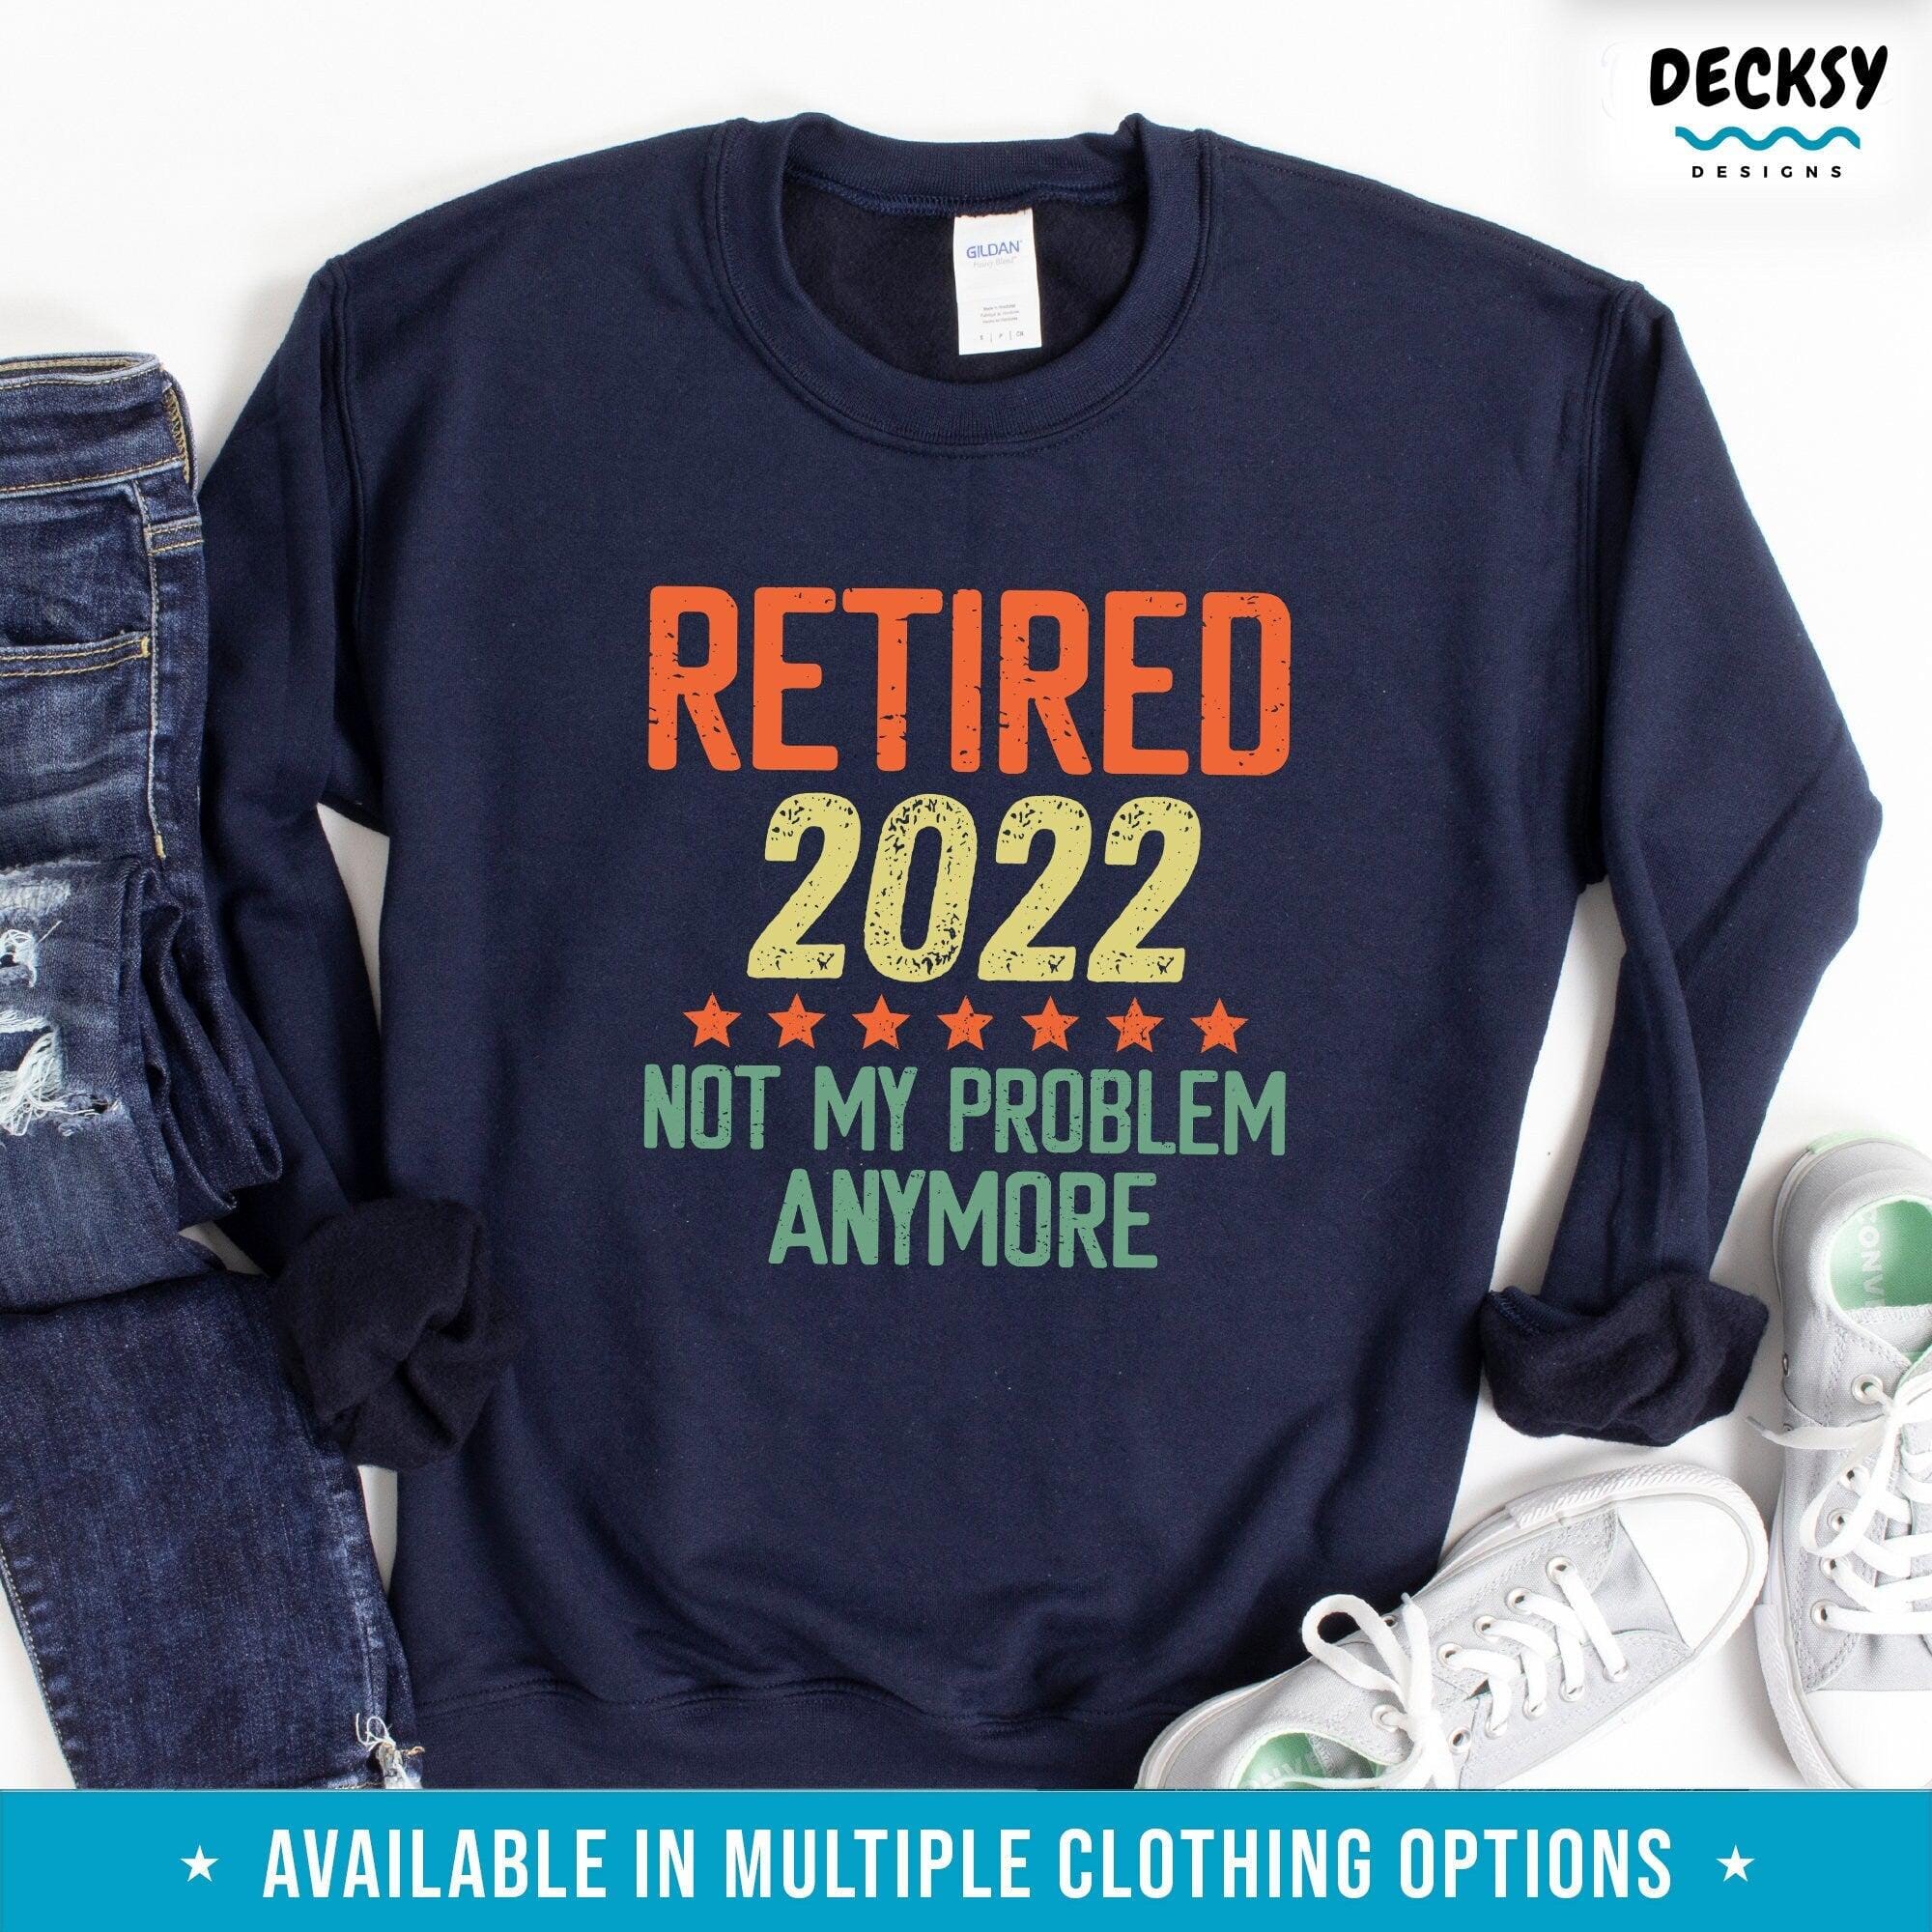 Retired 2022 Shirt, Funny Retirement Gift-Clothing:Gender-Neutral Adult Clothing:Tops & Tees:T-shirts:Graphic Tees-DecksyDesigns